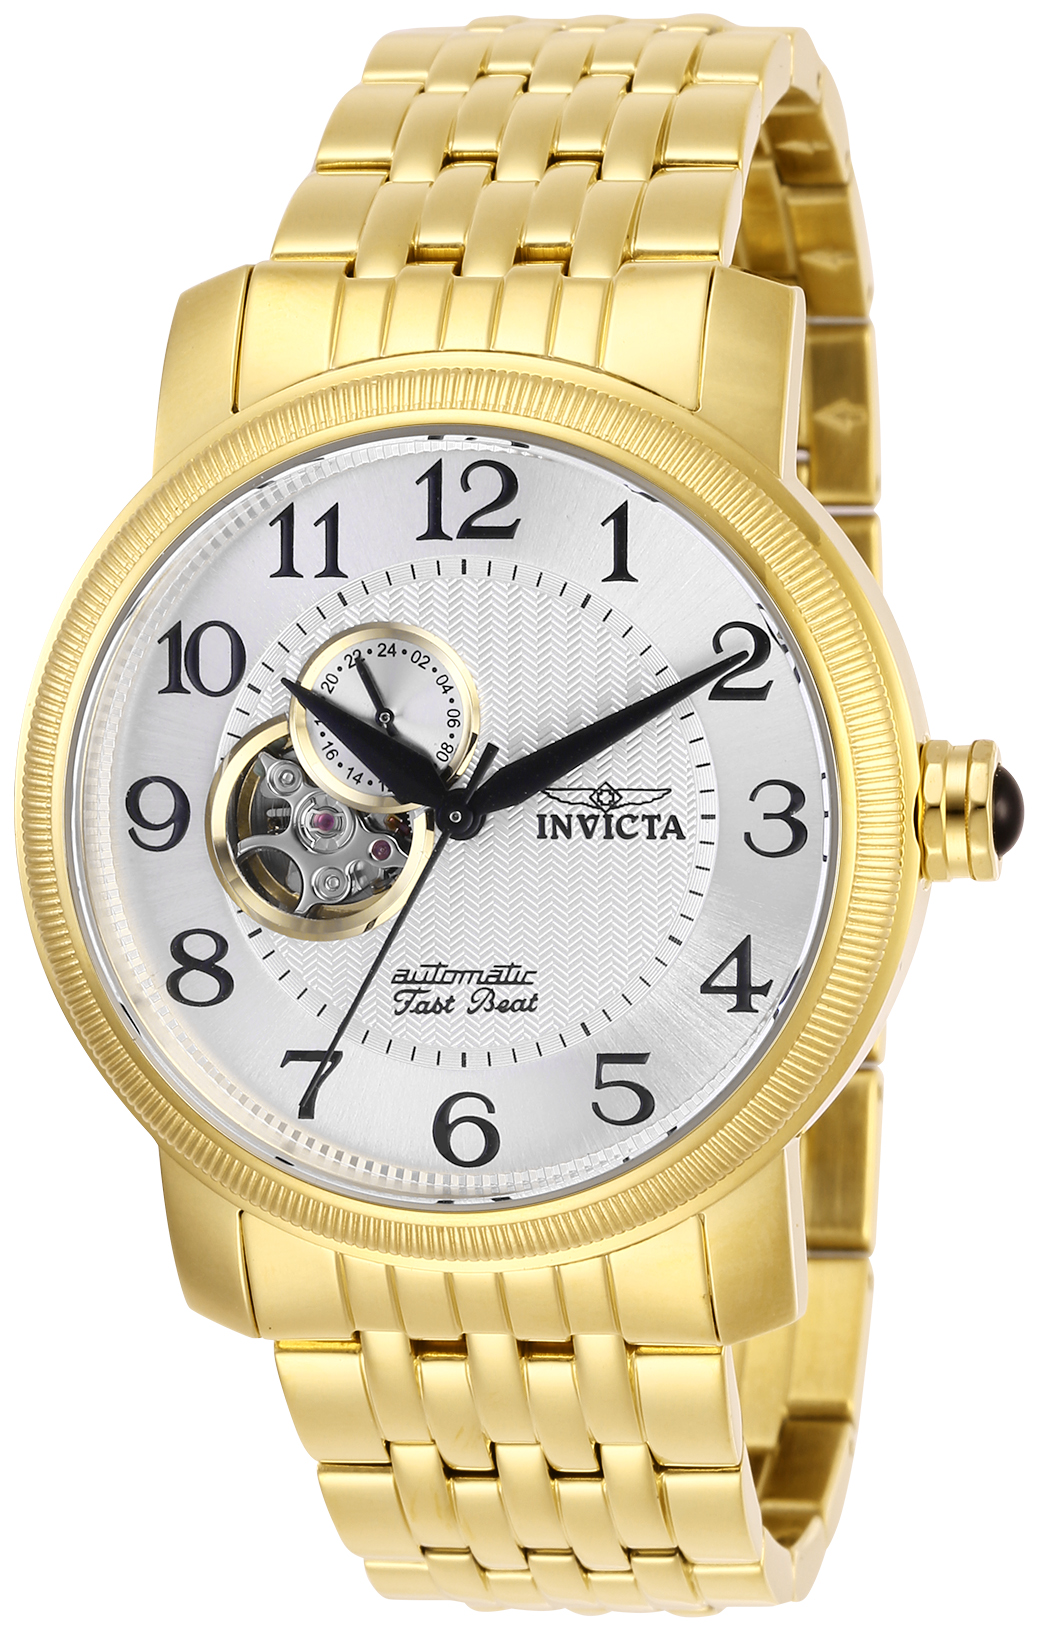 Pre-Owned Invicta Lucid Automatic Mens Watch - 43mm Stainless Steel Case, Stainless Steel Band, Gold (28792)